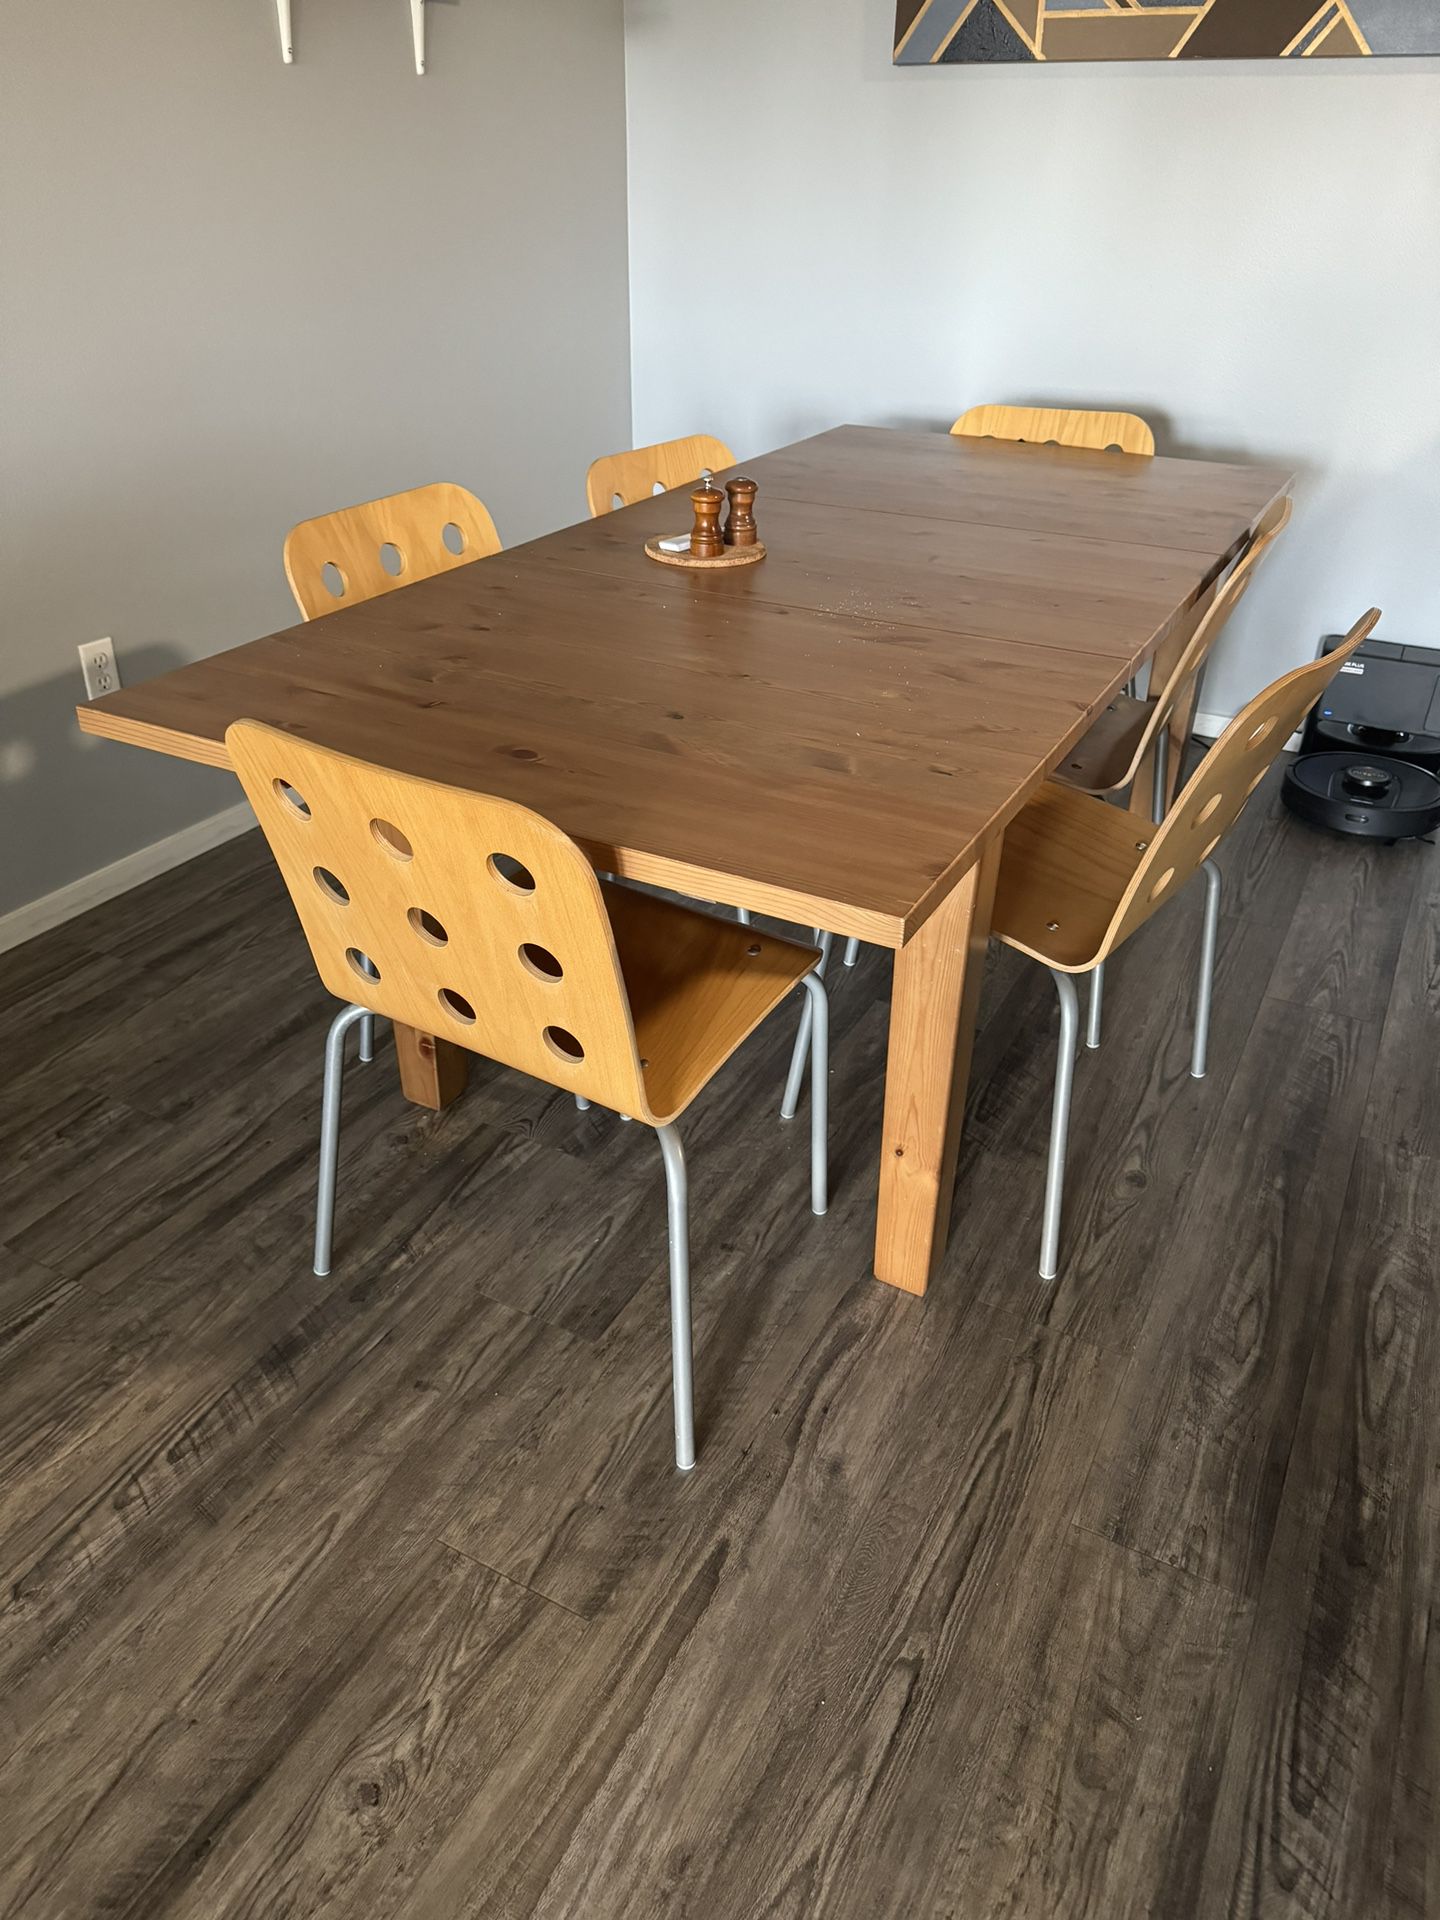 PENDING EXTENDABLE DINING TABLE AND 5 CHAIR